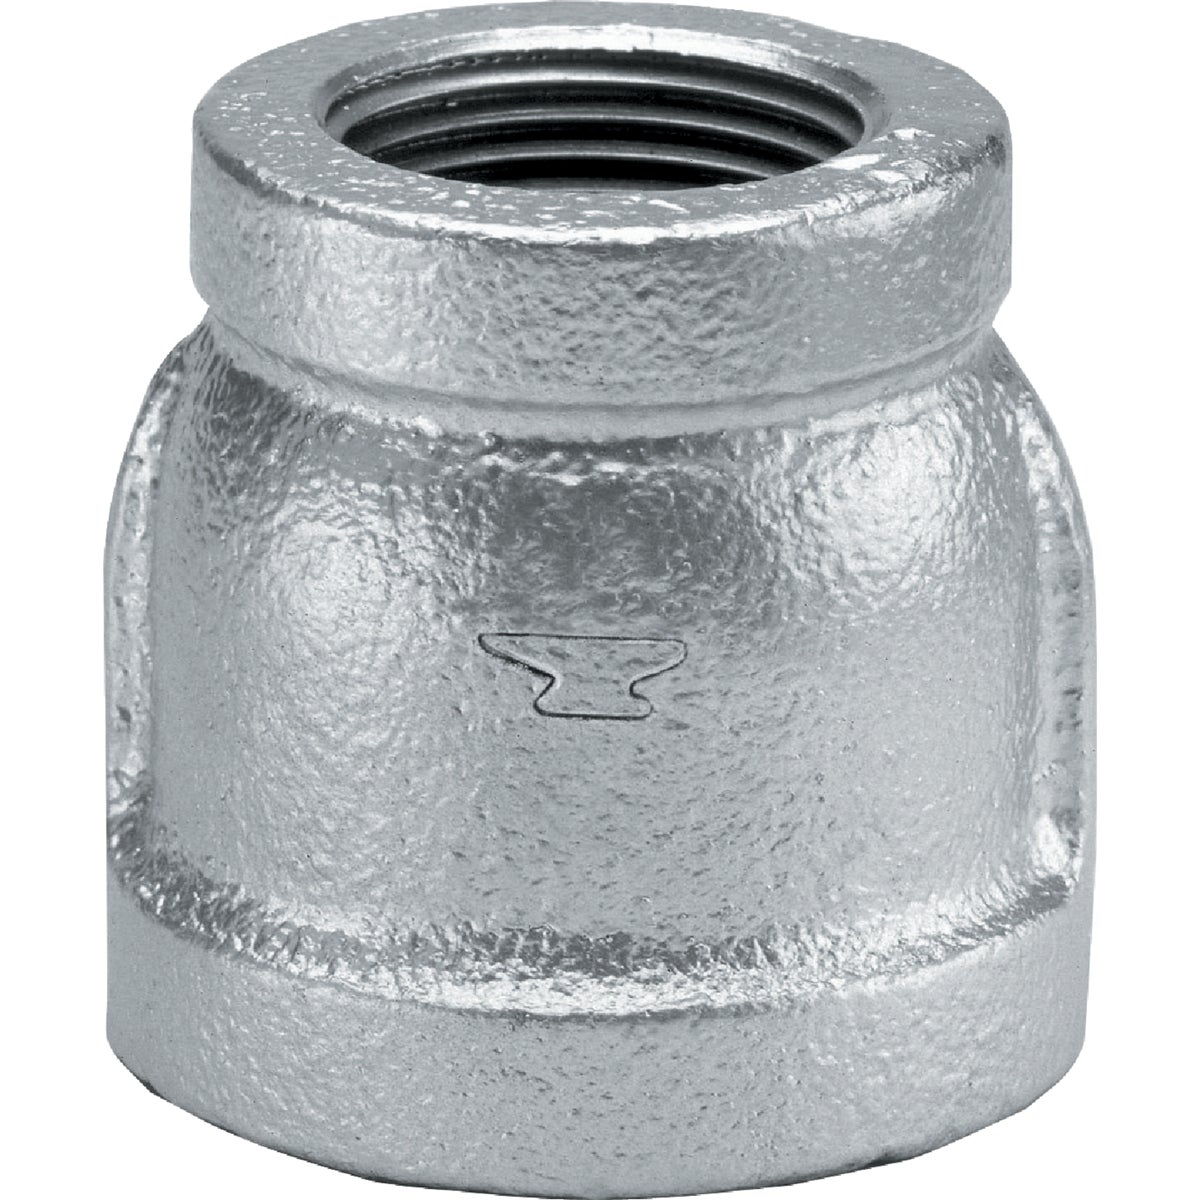 Item 422545, Galvanized reducing coupling made by Anvil.